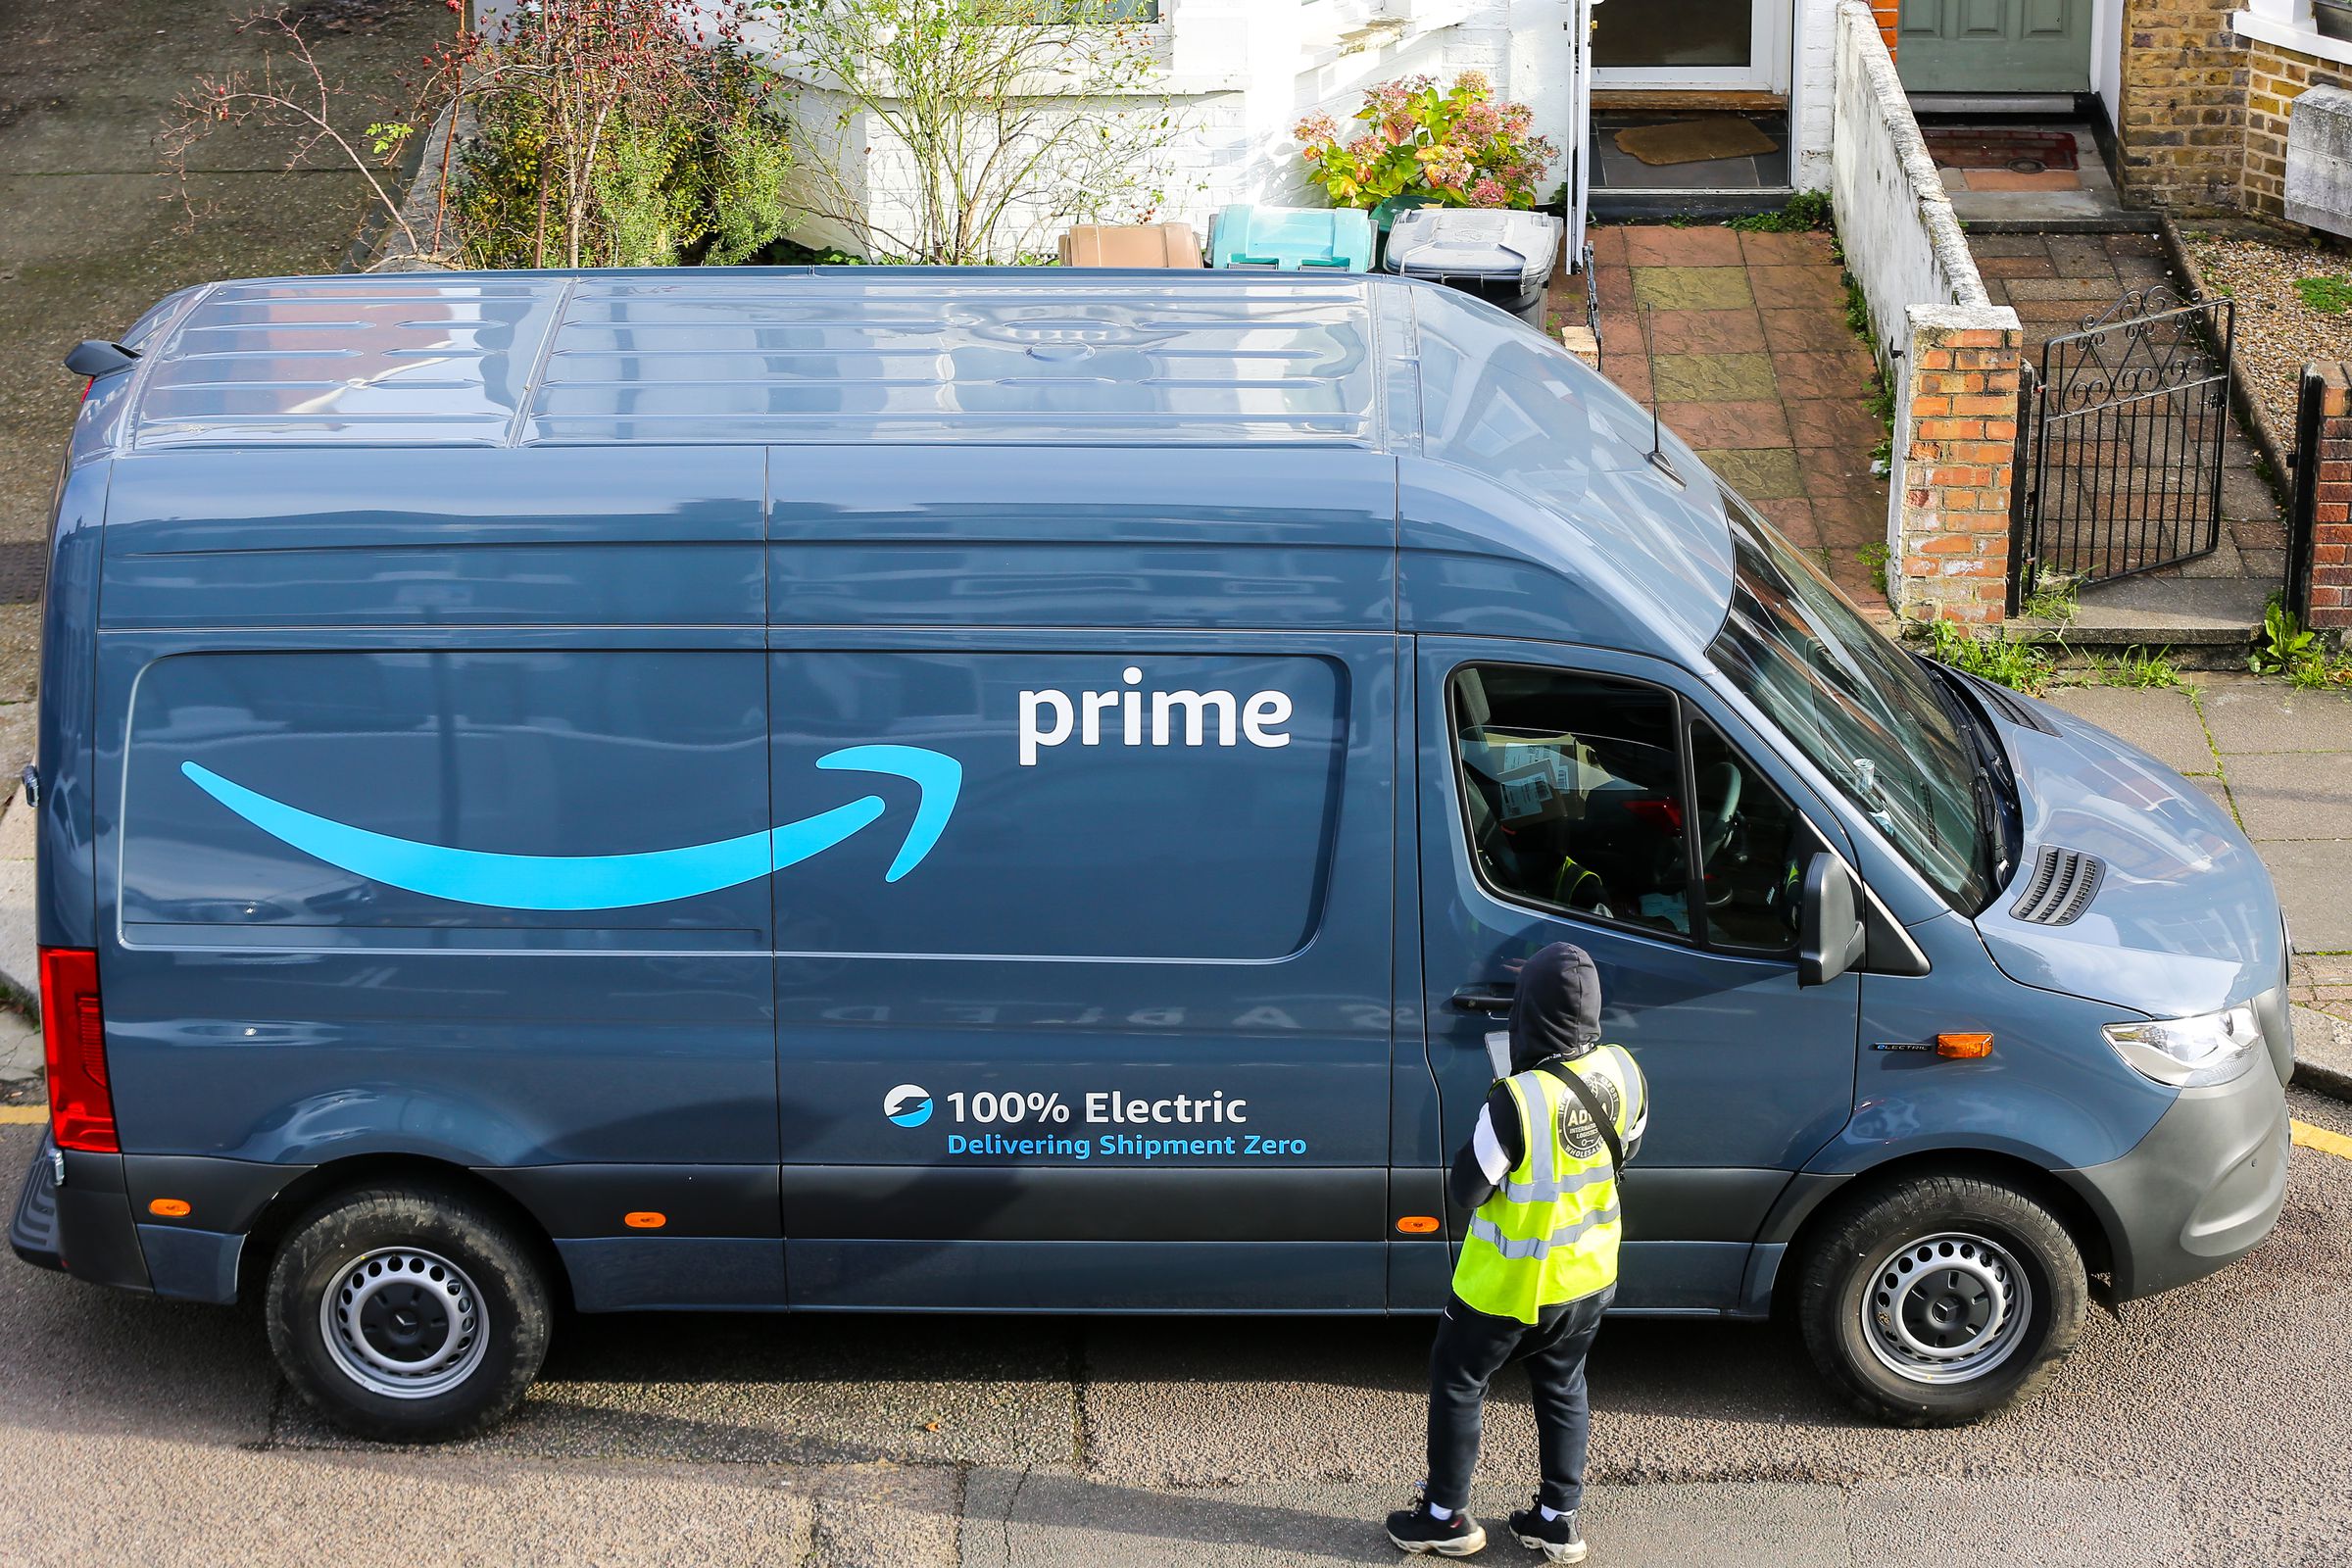 An Amazon Prime delivery van is seen in London...